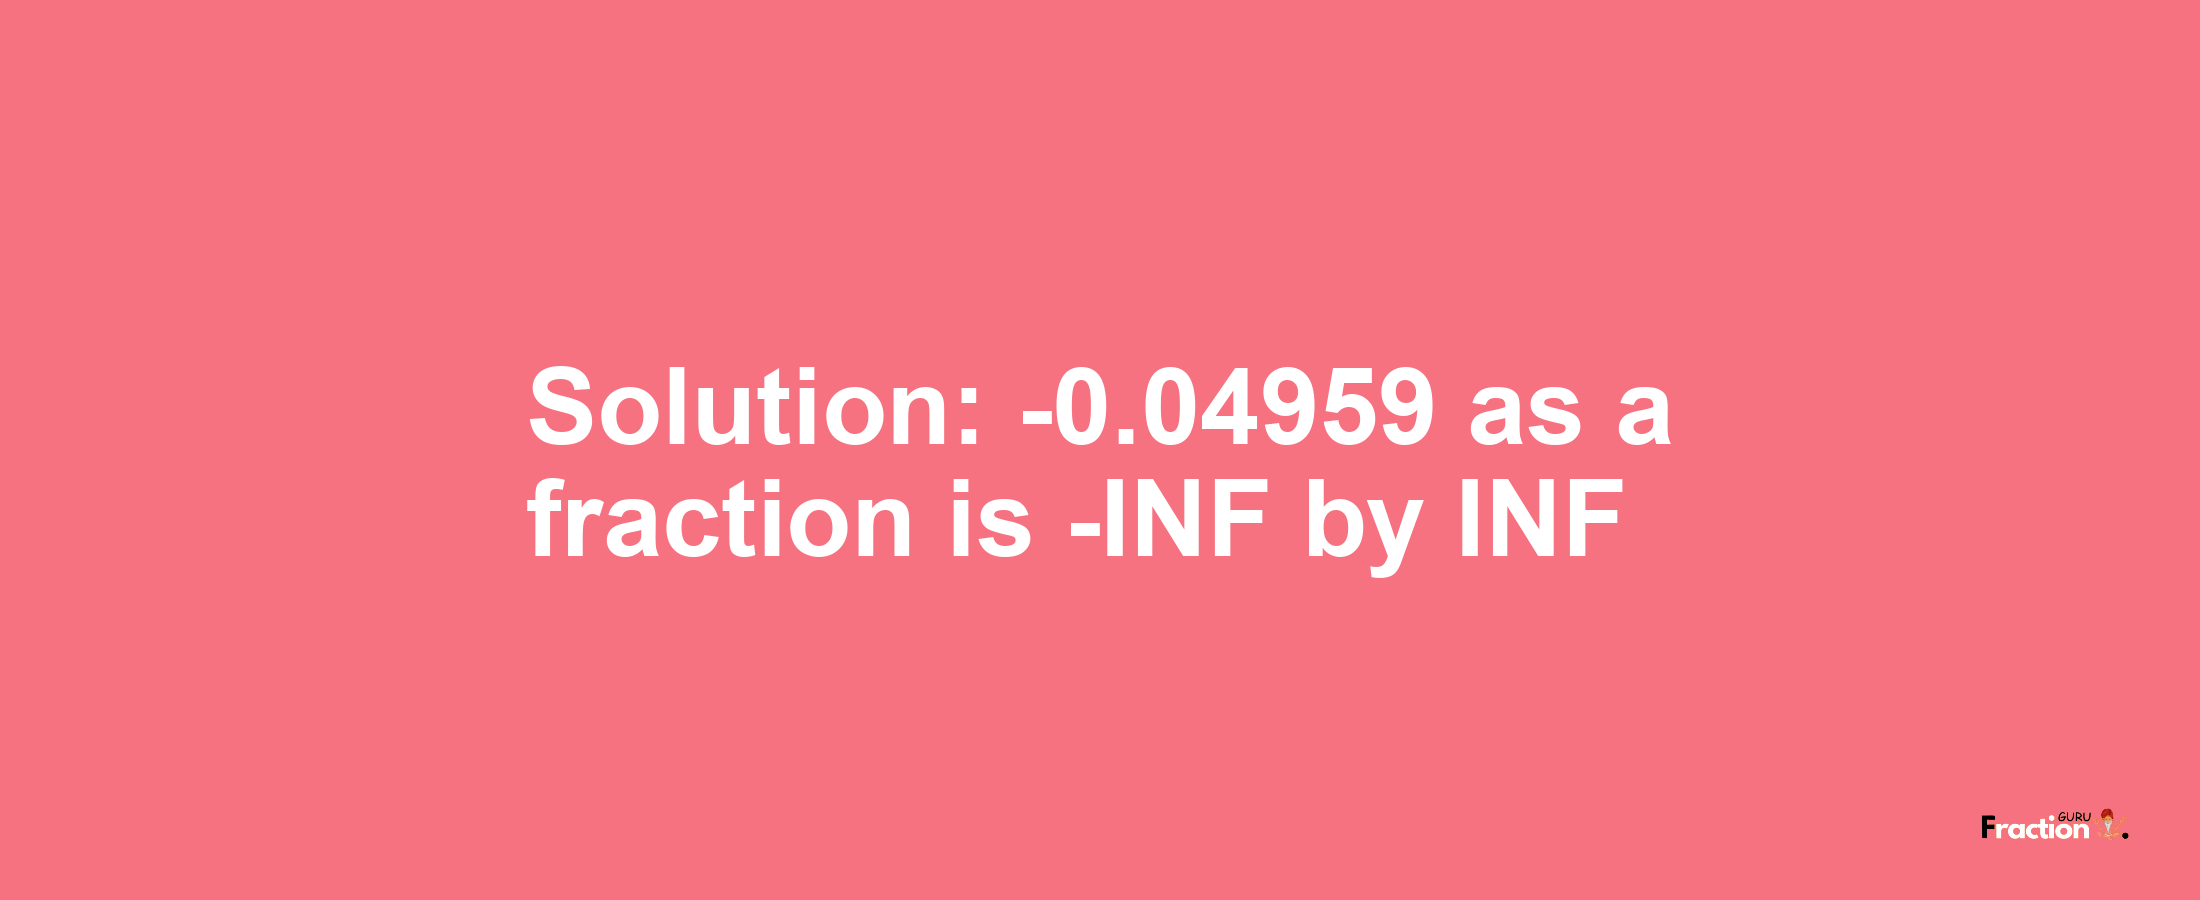 Solution:-0.04959 as a fraction is -INF/INF